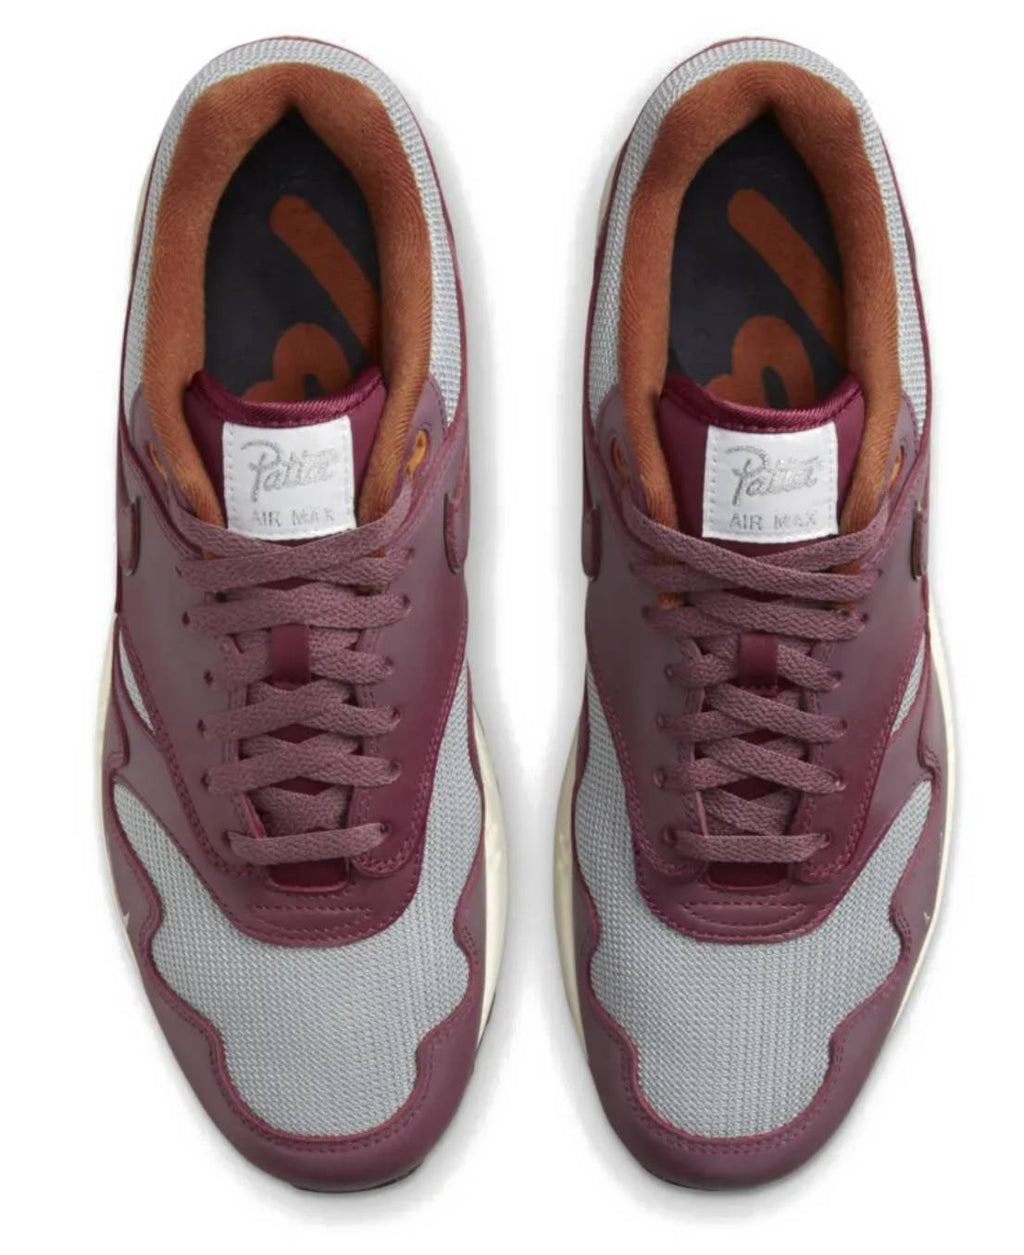  Nike Air Max 1 Patta Shoes Waves Rush Maroon Without Bracelet Bordeaux Uomo - 4